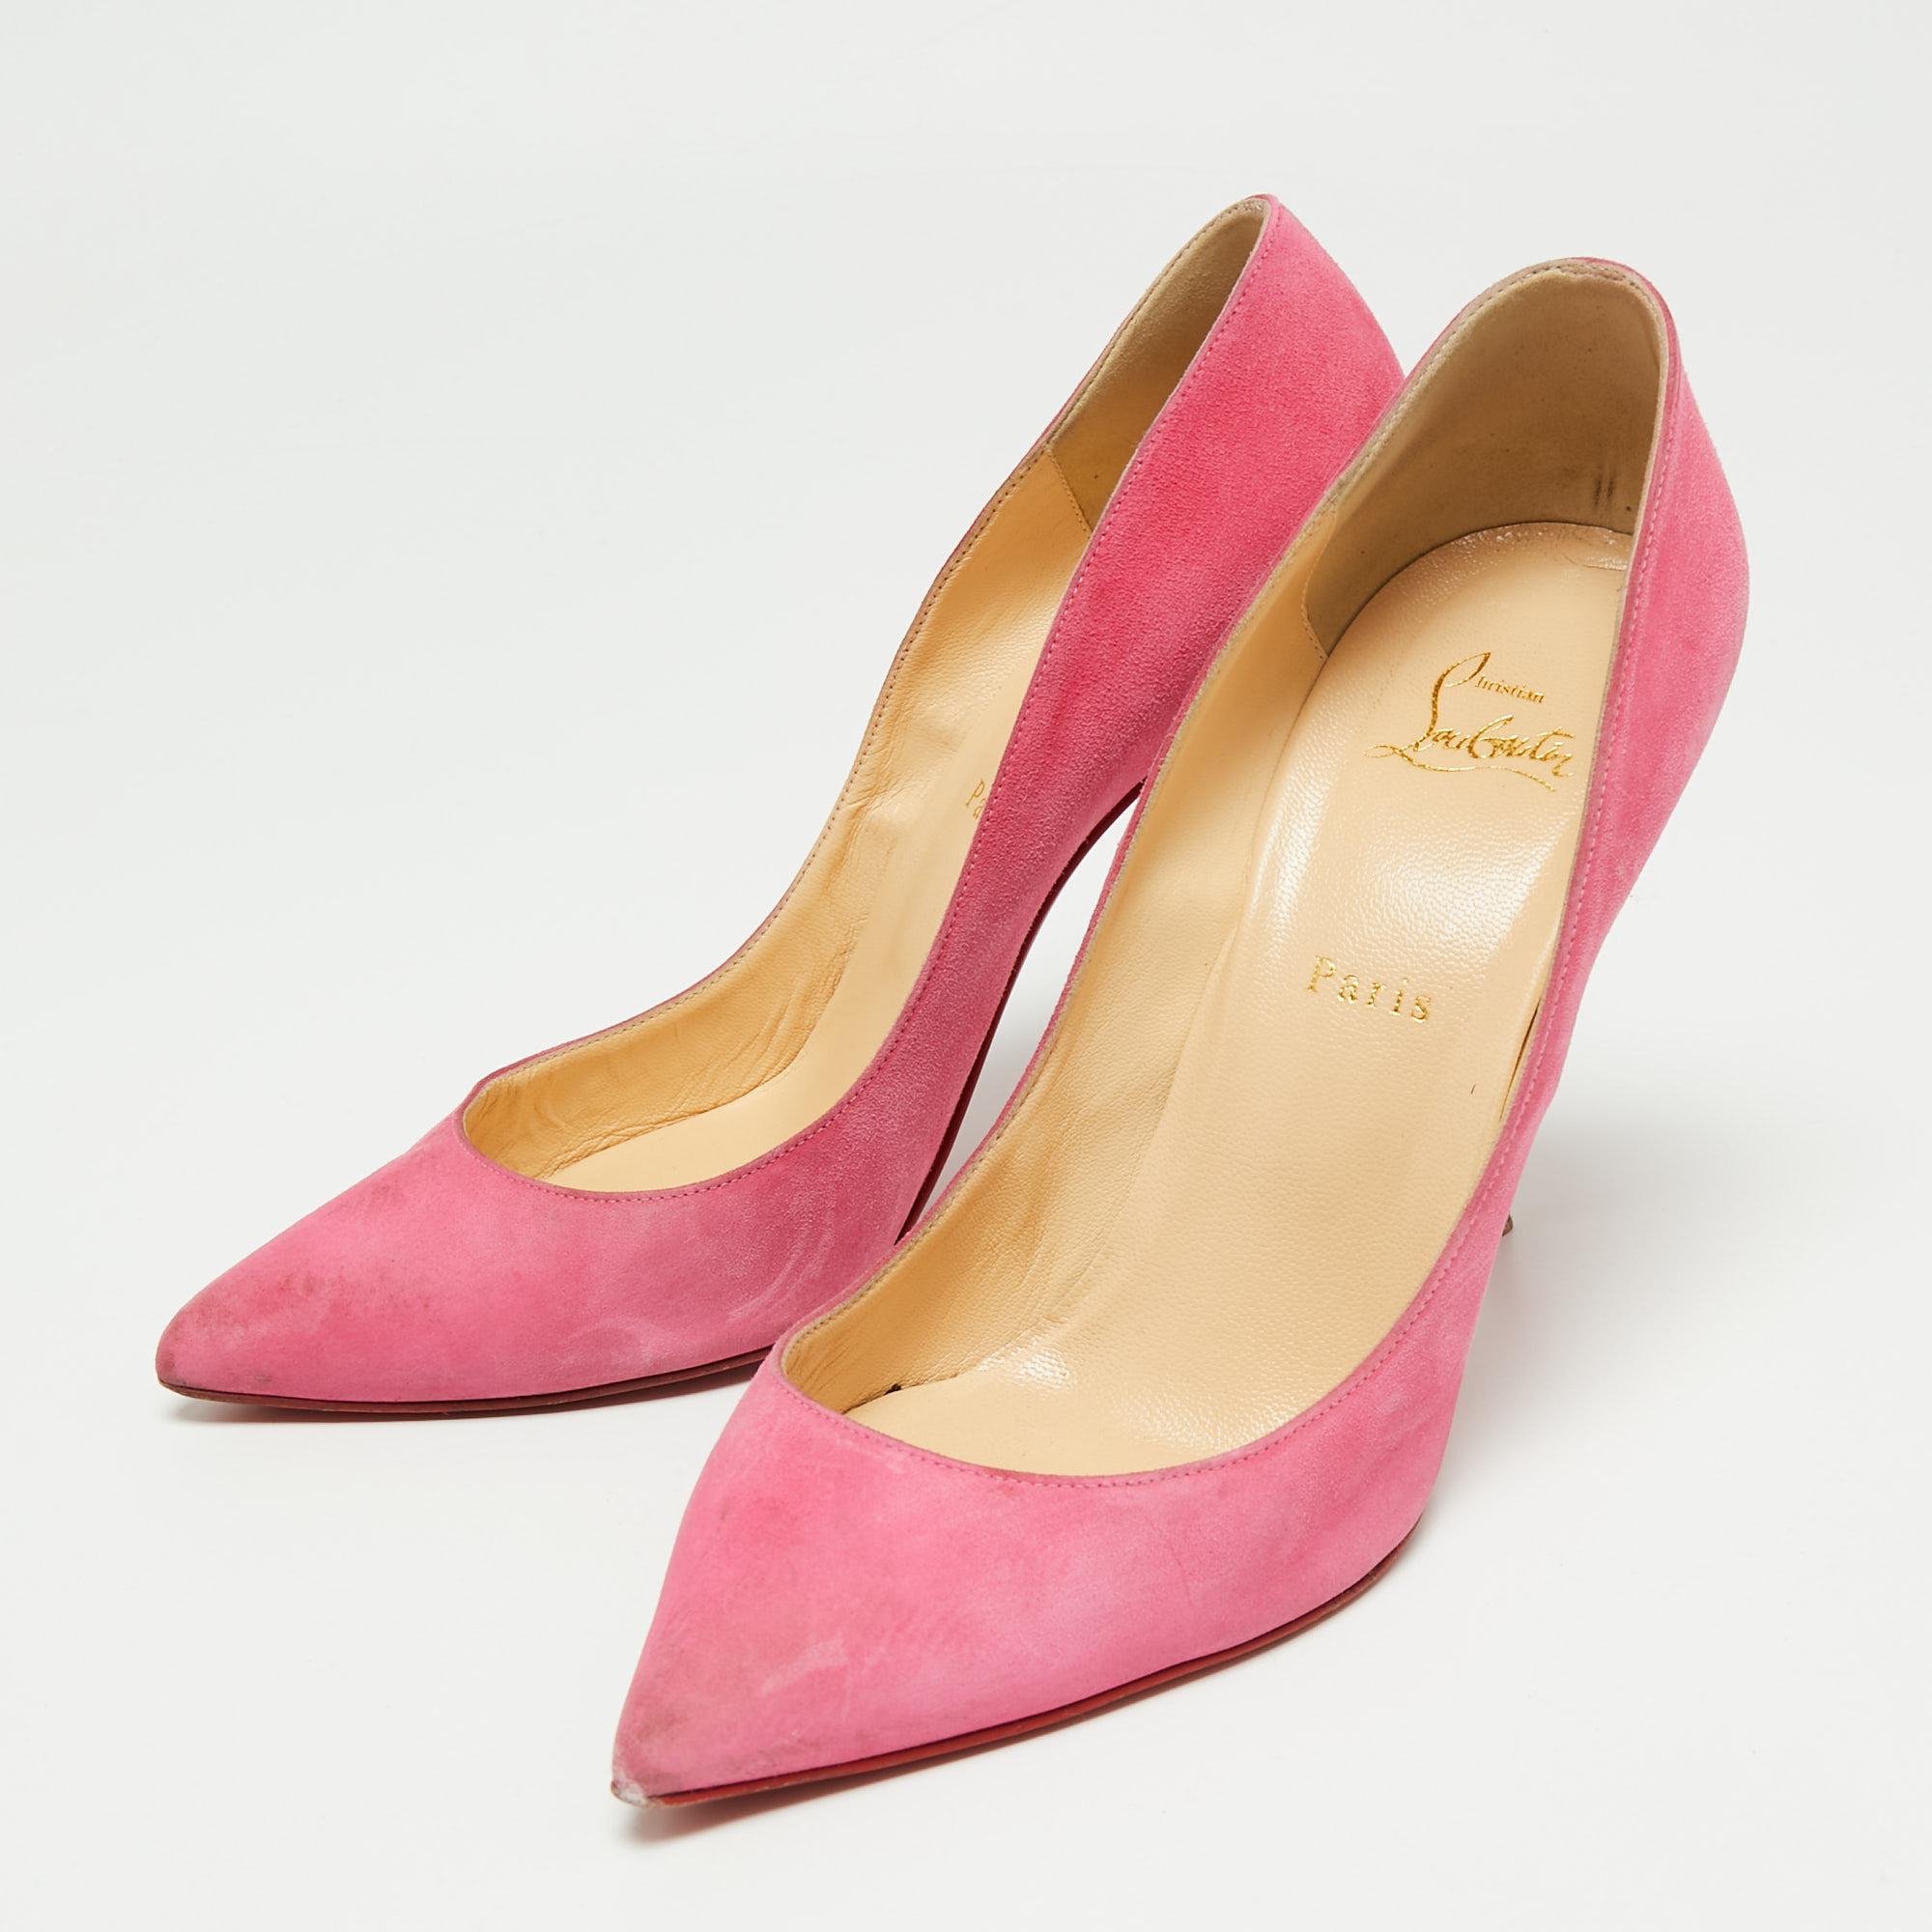 The classic pointed toes and signature red-lacquered sole characterize this pair of Christian Louboutin pumps. Crafted from suede, it has been styled with nicely cut vamps and a leather insole. The 12cm heels signify the brand's expertise in